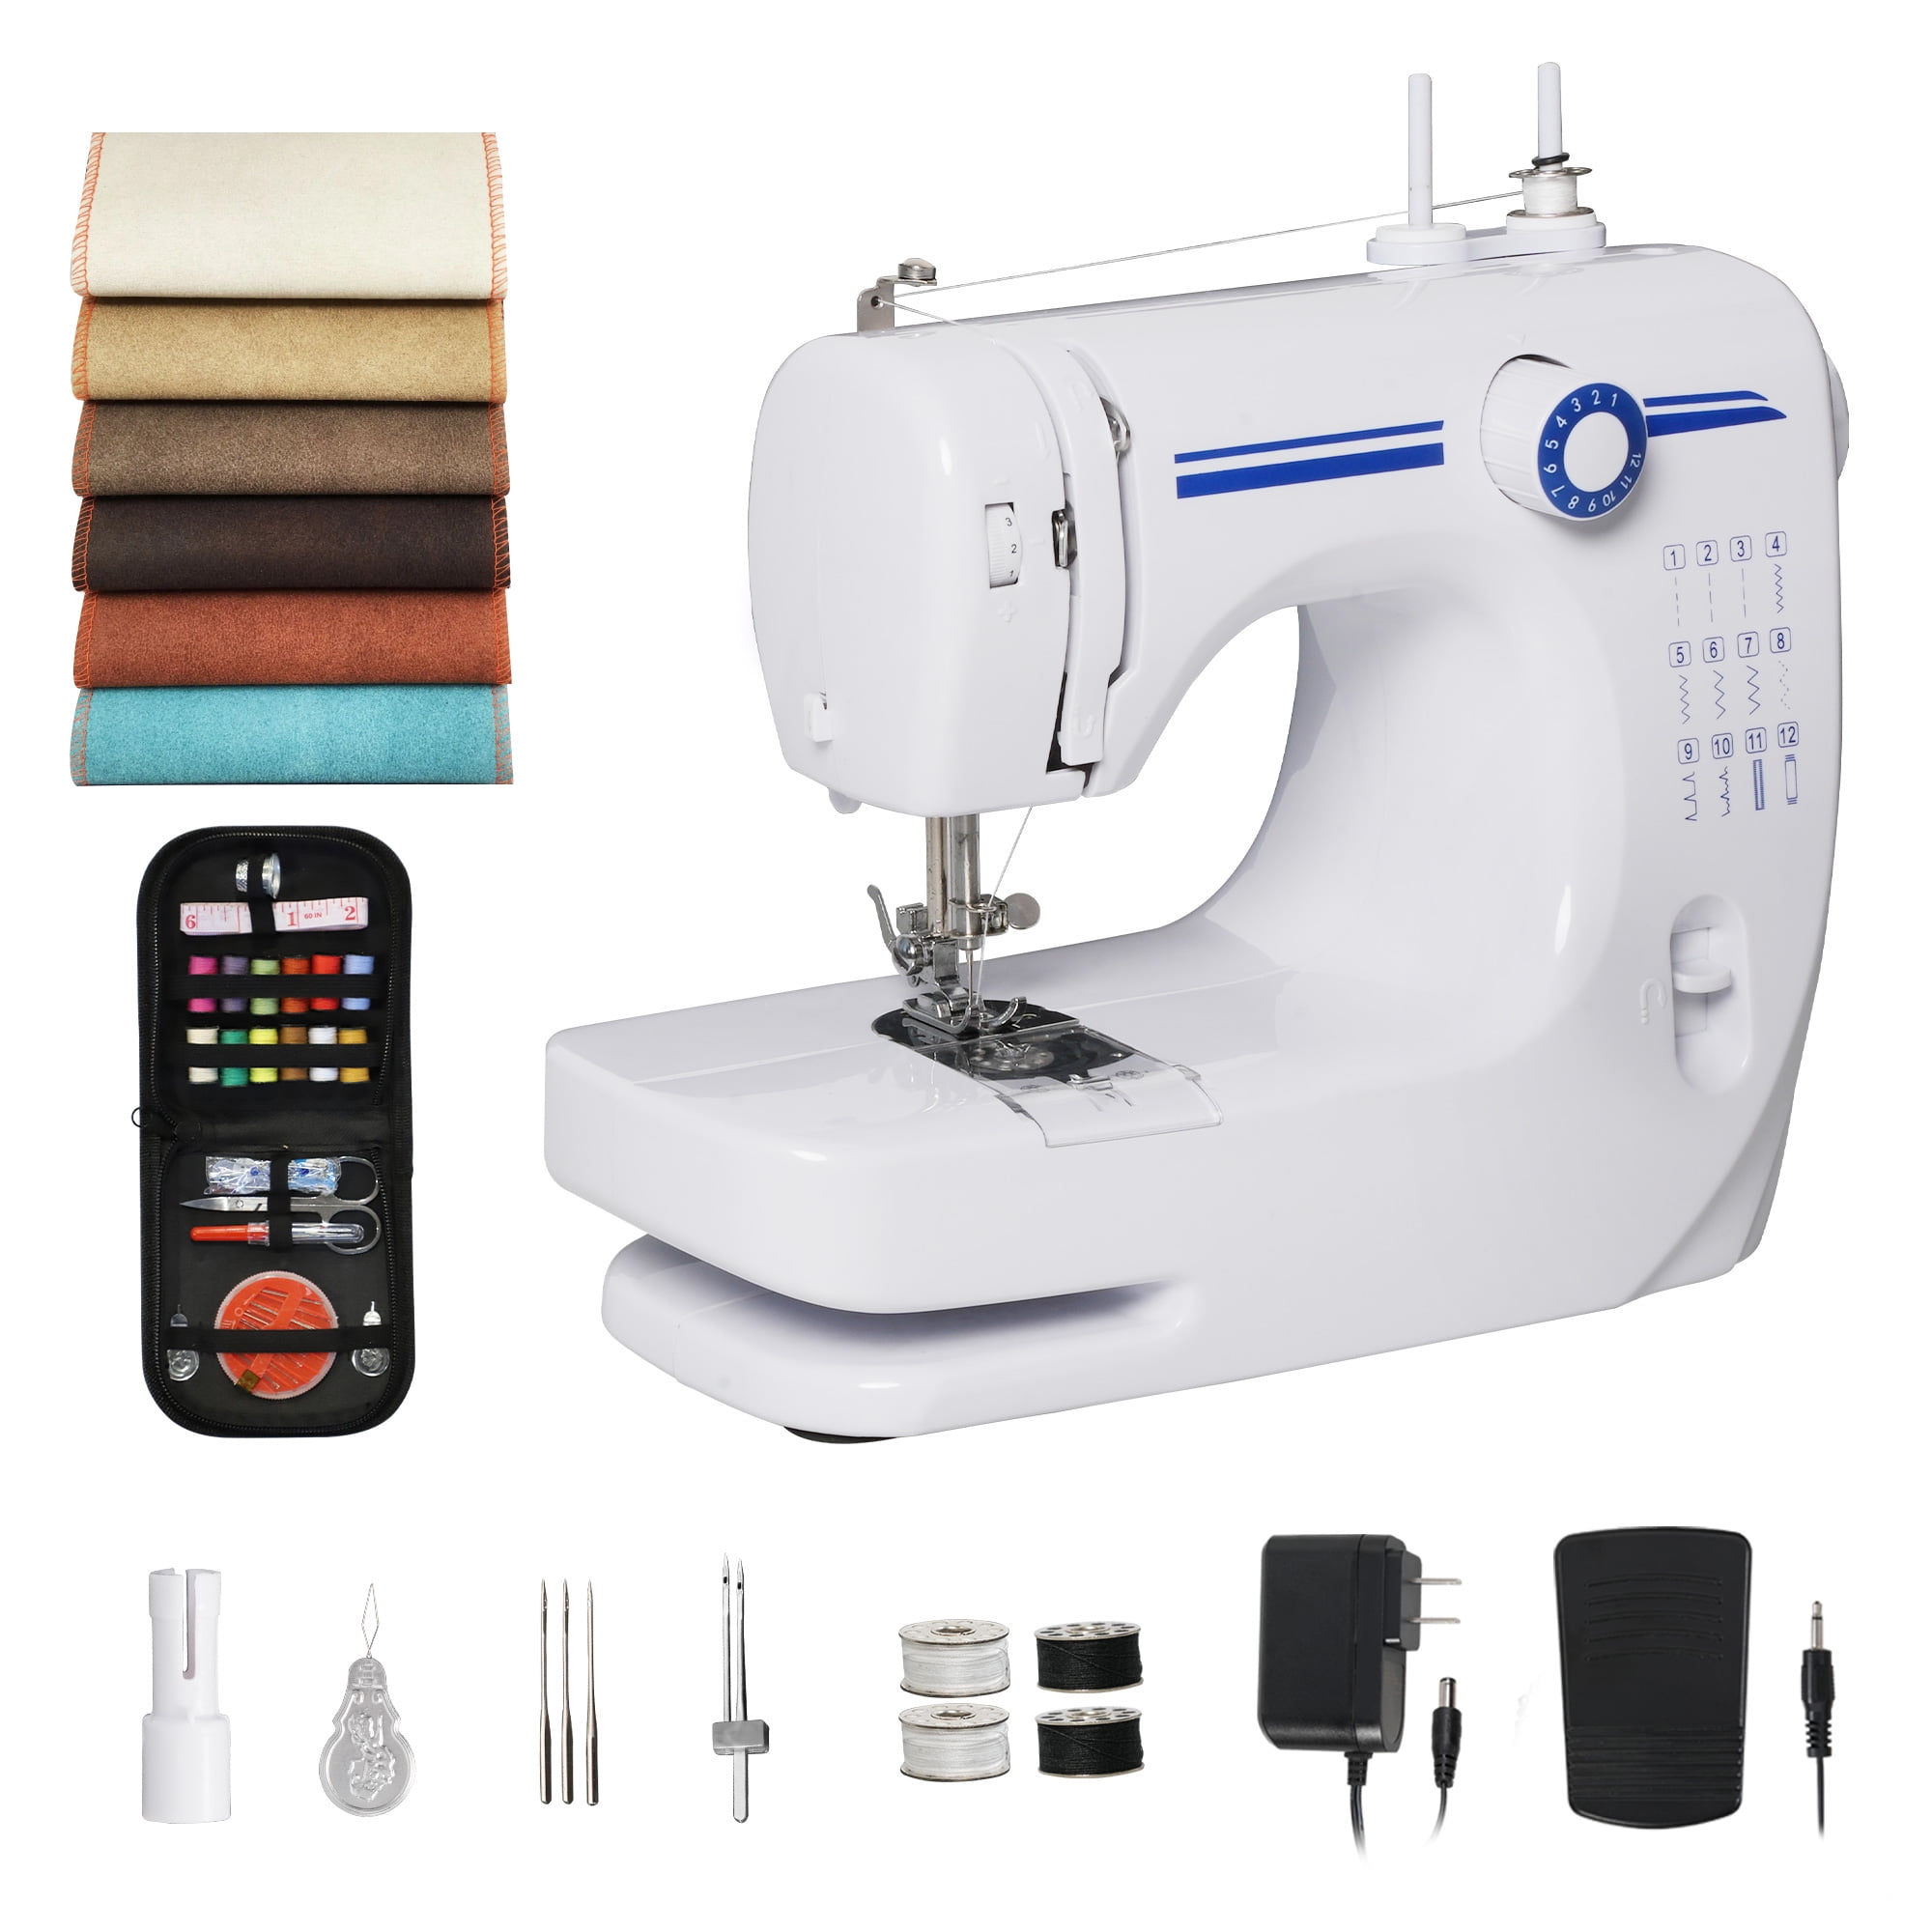 Sewing Machine for Beginners, Portable Mini Sewing Machine, Upgraded Double  Needle Sewing, 12 Built-in Stitches, 2 Speeds Double Thread with Foot